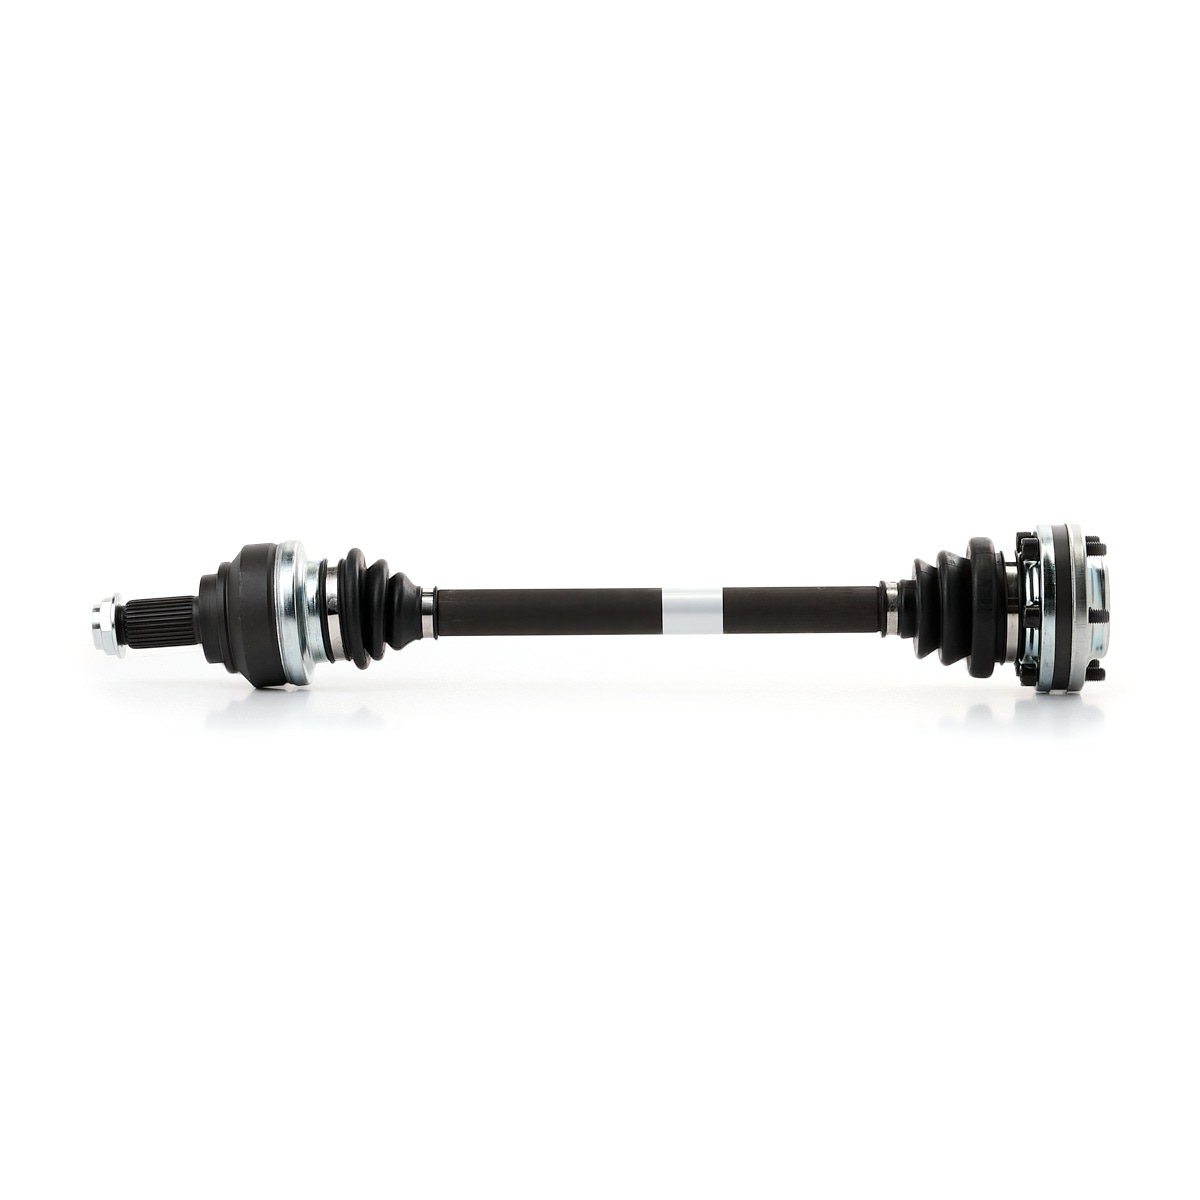 Buy Drive shaft SKF VKJC 8675 - BMW Drive shaft and cv joint parts online